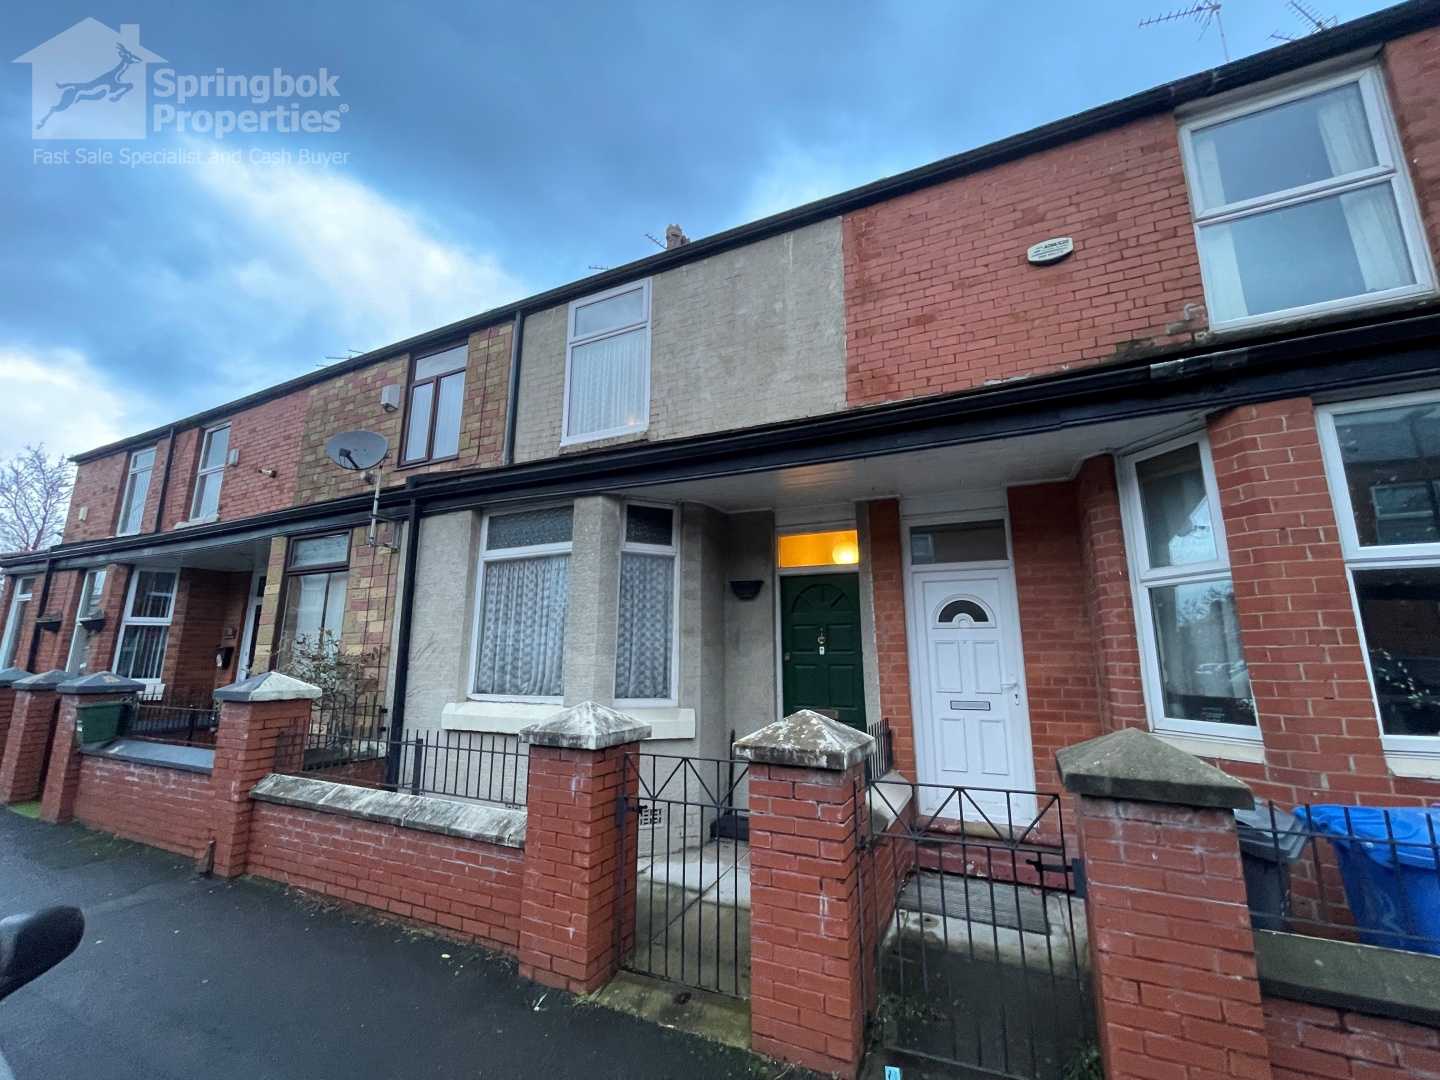 Hus i Openshaw, Manchester 11391414